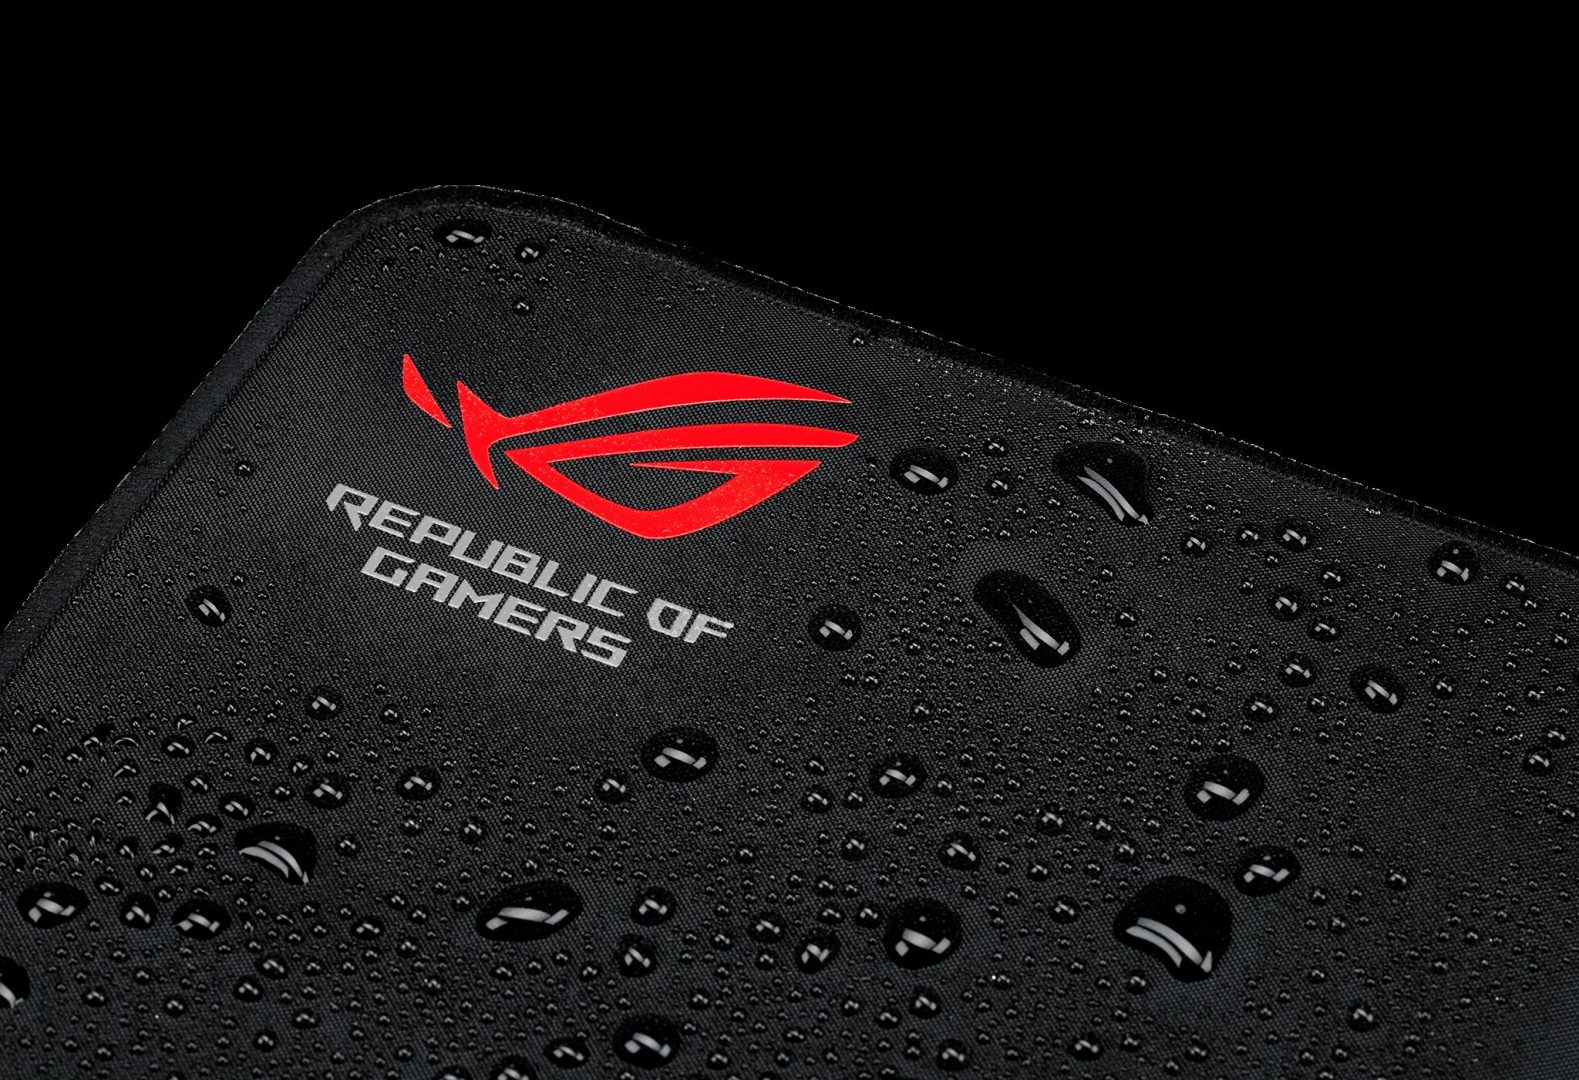 ASUS Republic of Gamers Showcases Brand New Gaming Innovations at Computex 2017